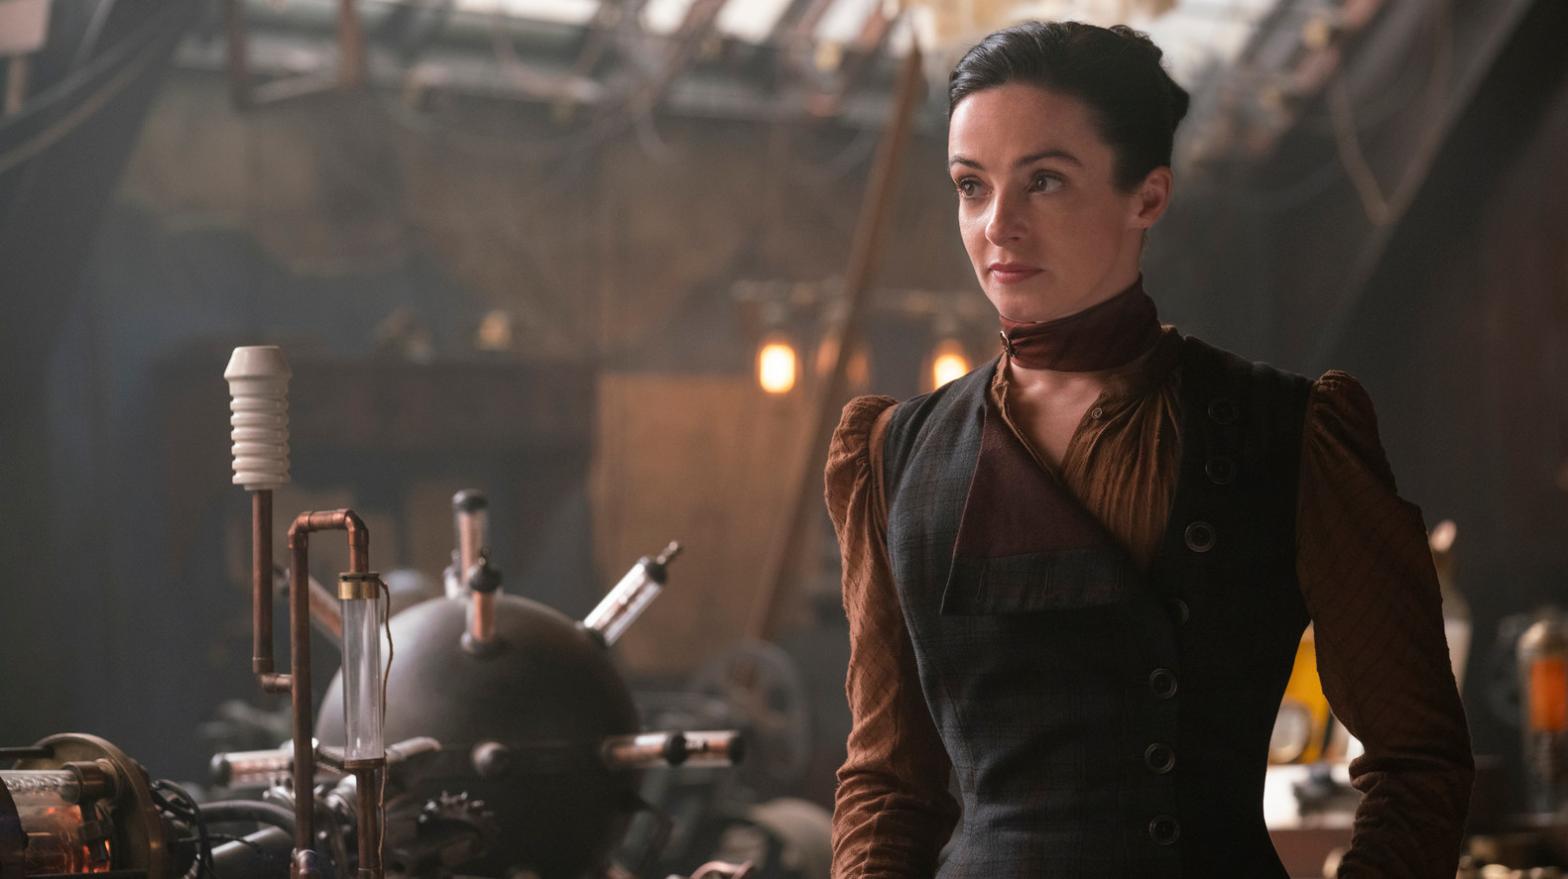 Outlander's Laura Donnelly as Amalia True. (Image: Keith Bernstein/HBO)